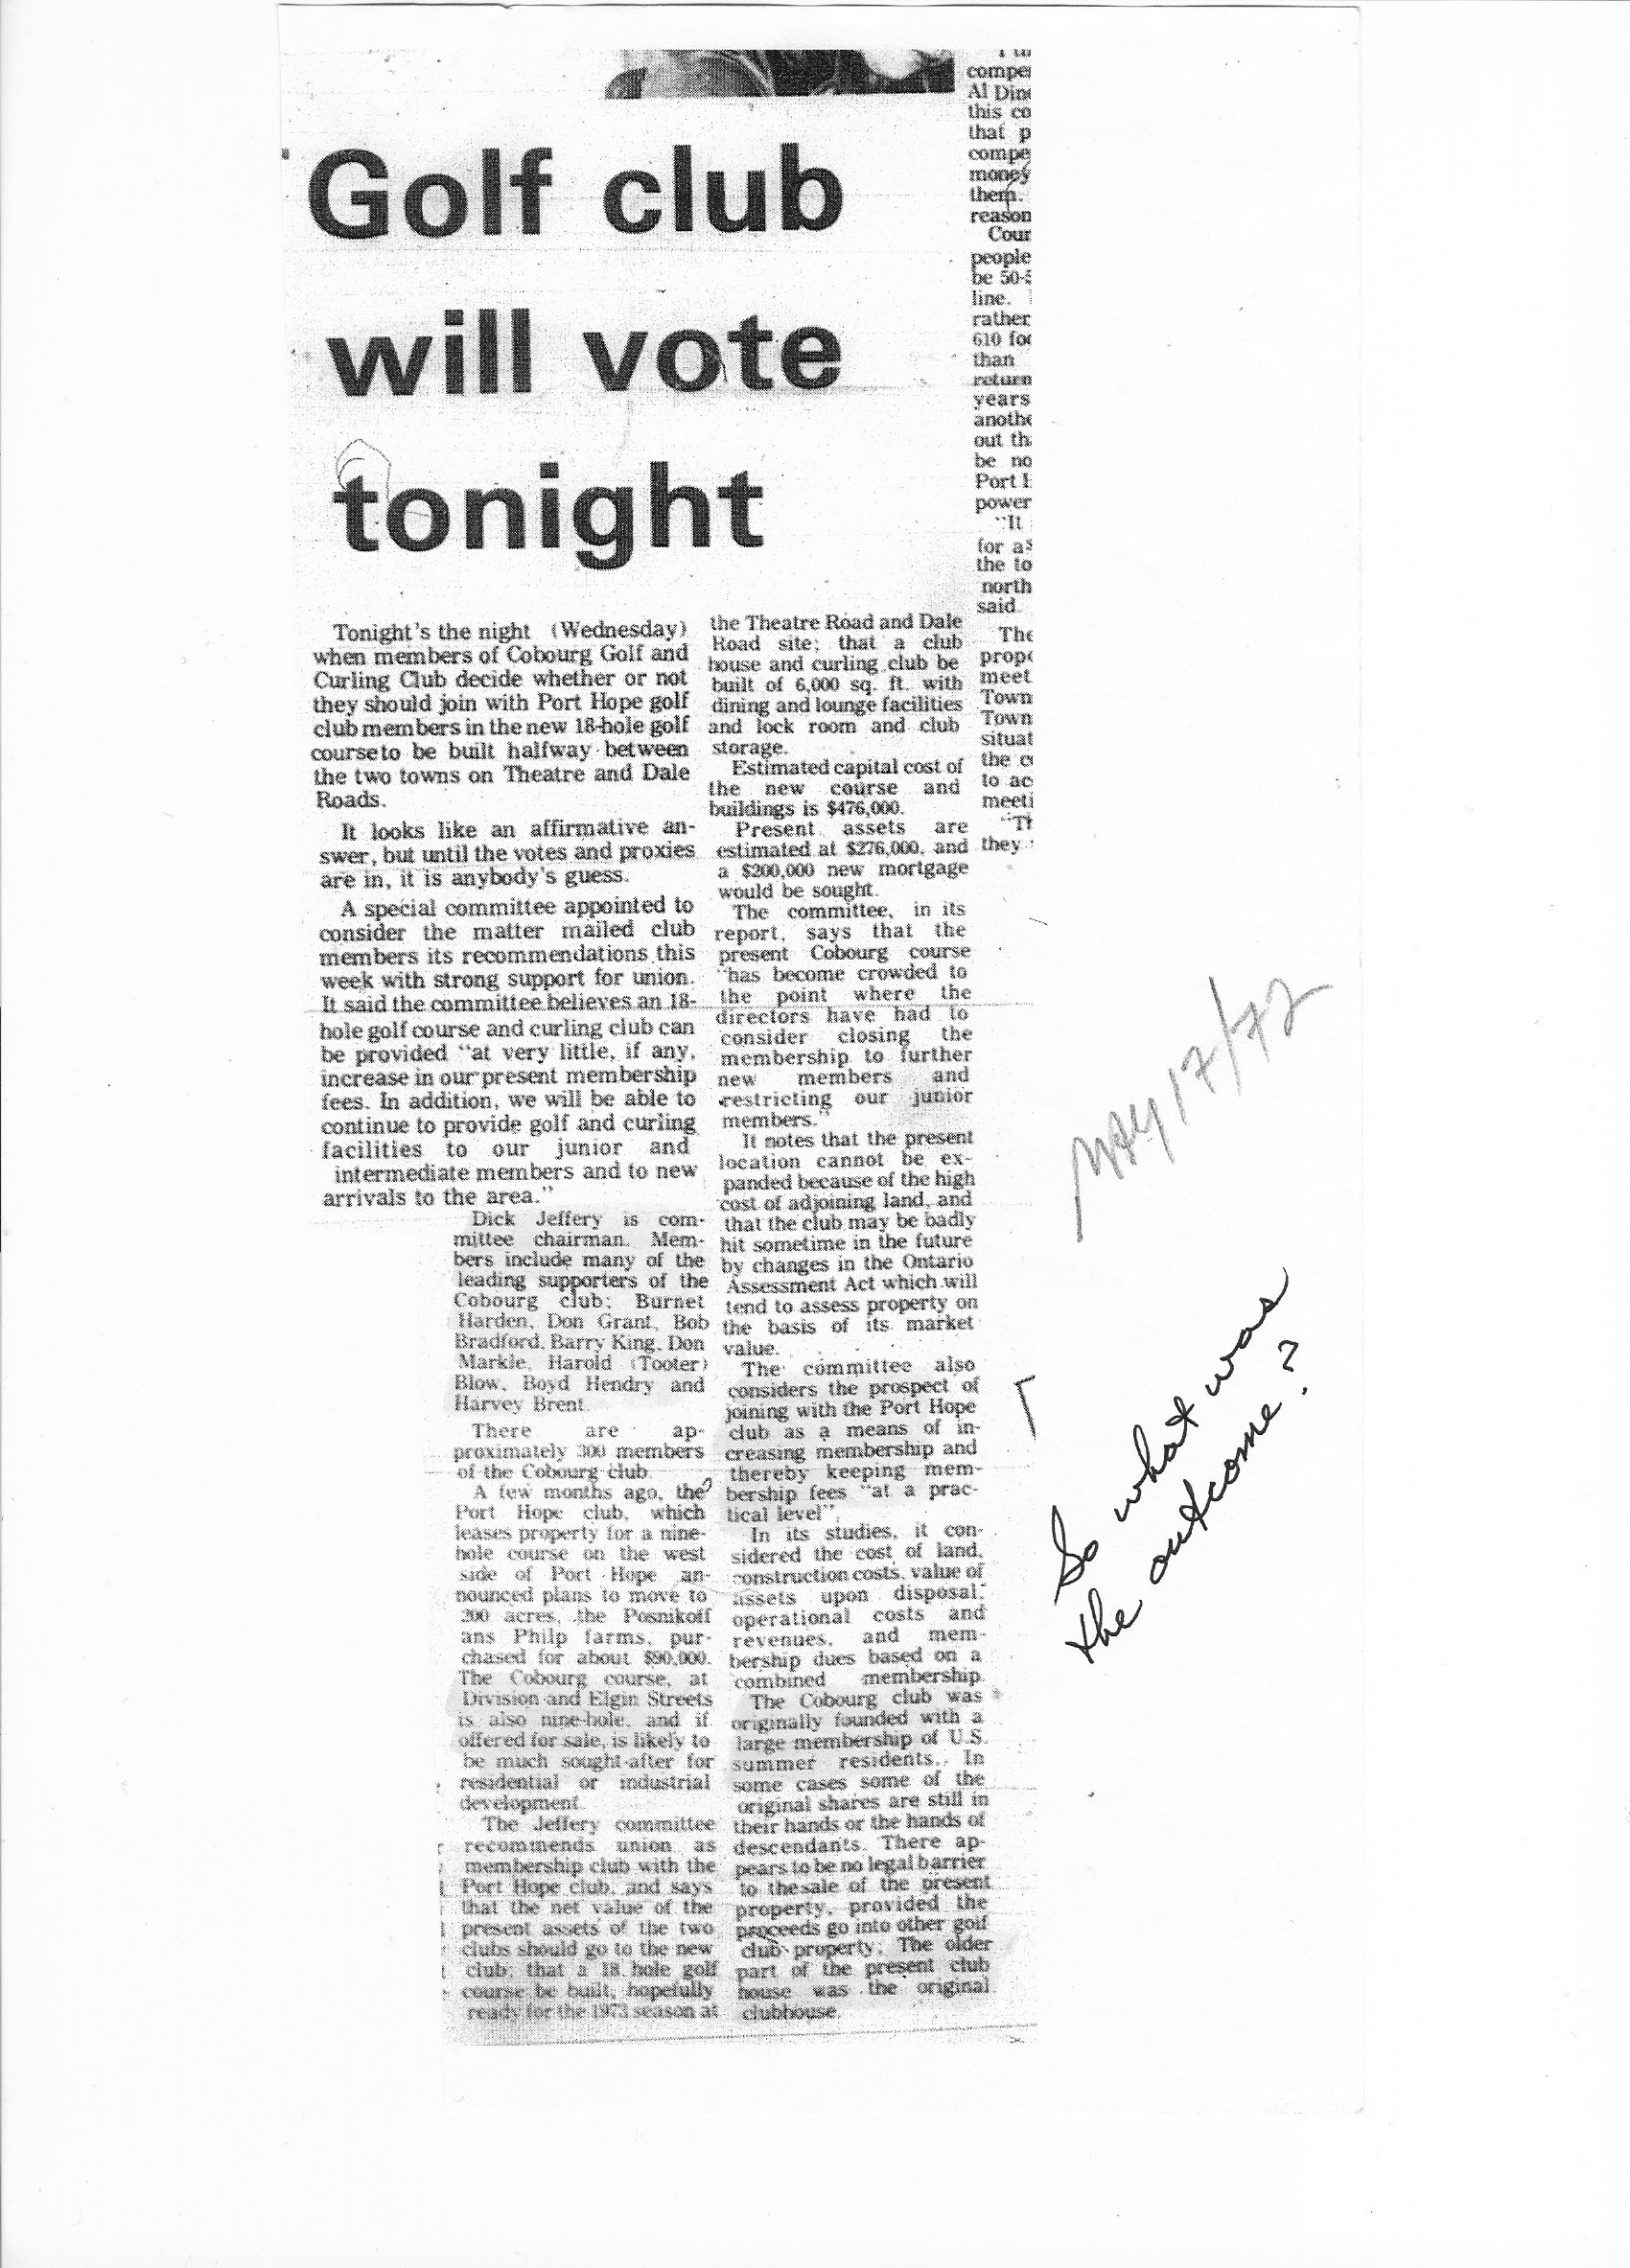 1972-05-17 Golf -Cobourg Votes to Join PH Club